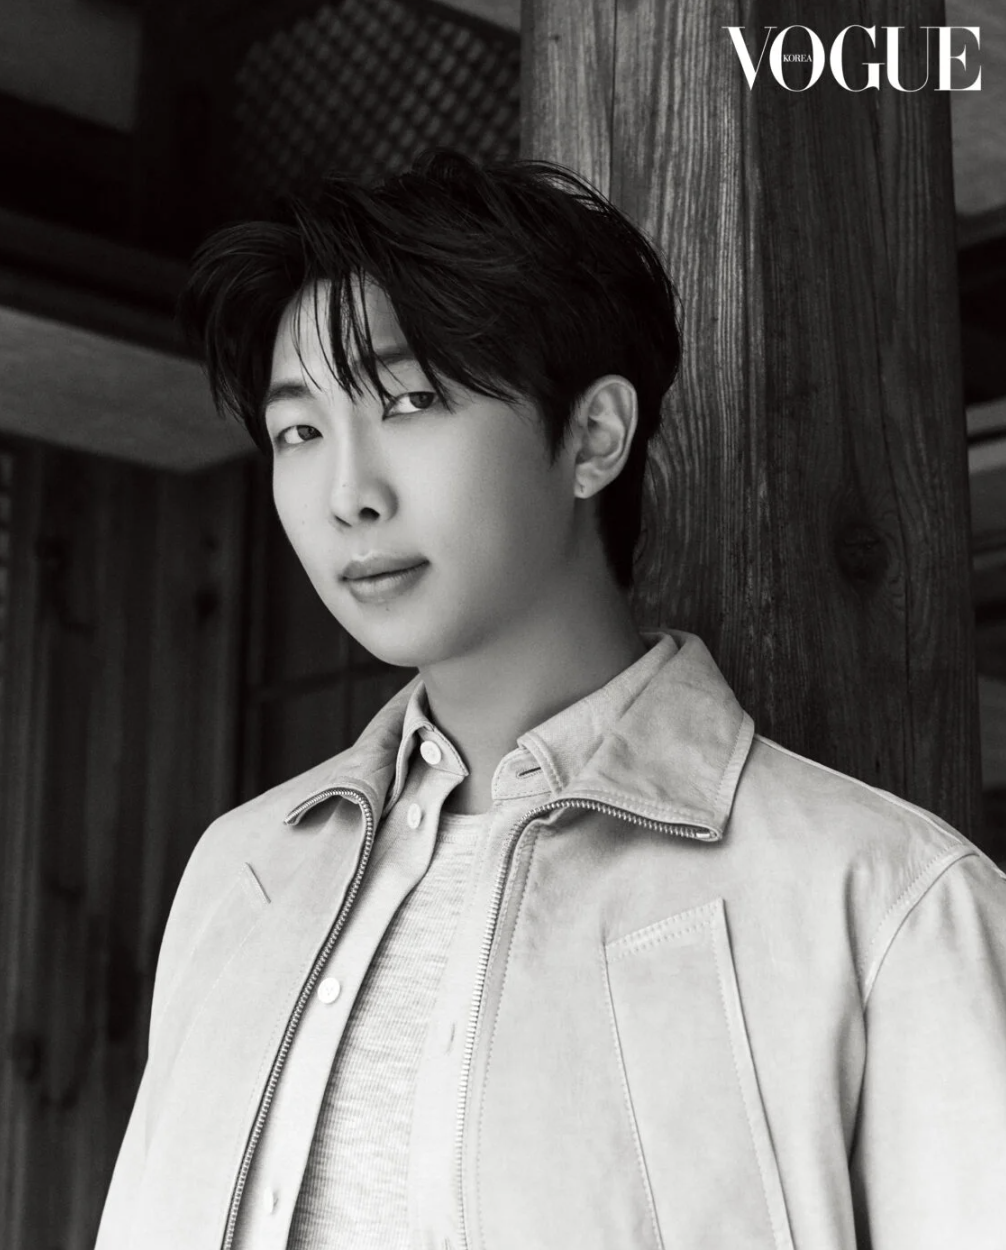 BTS Member RM is the Cover Star of Vogue Korea June 2023